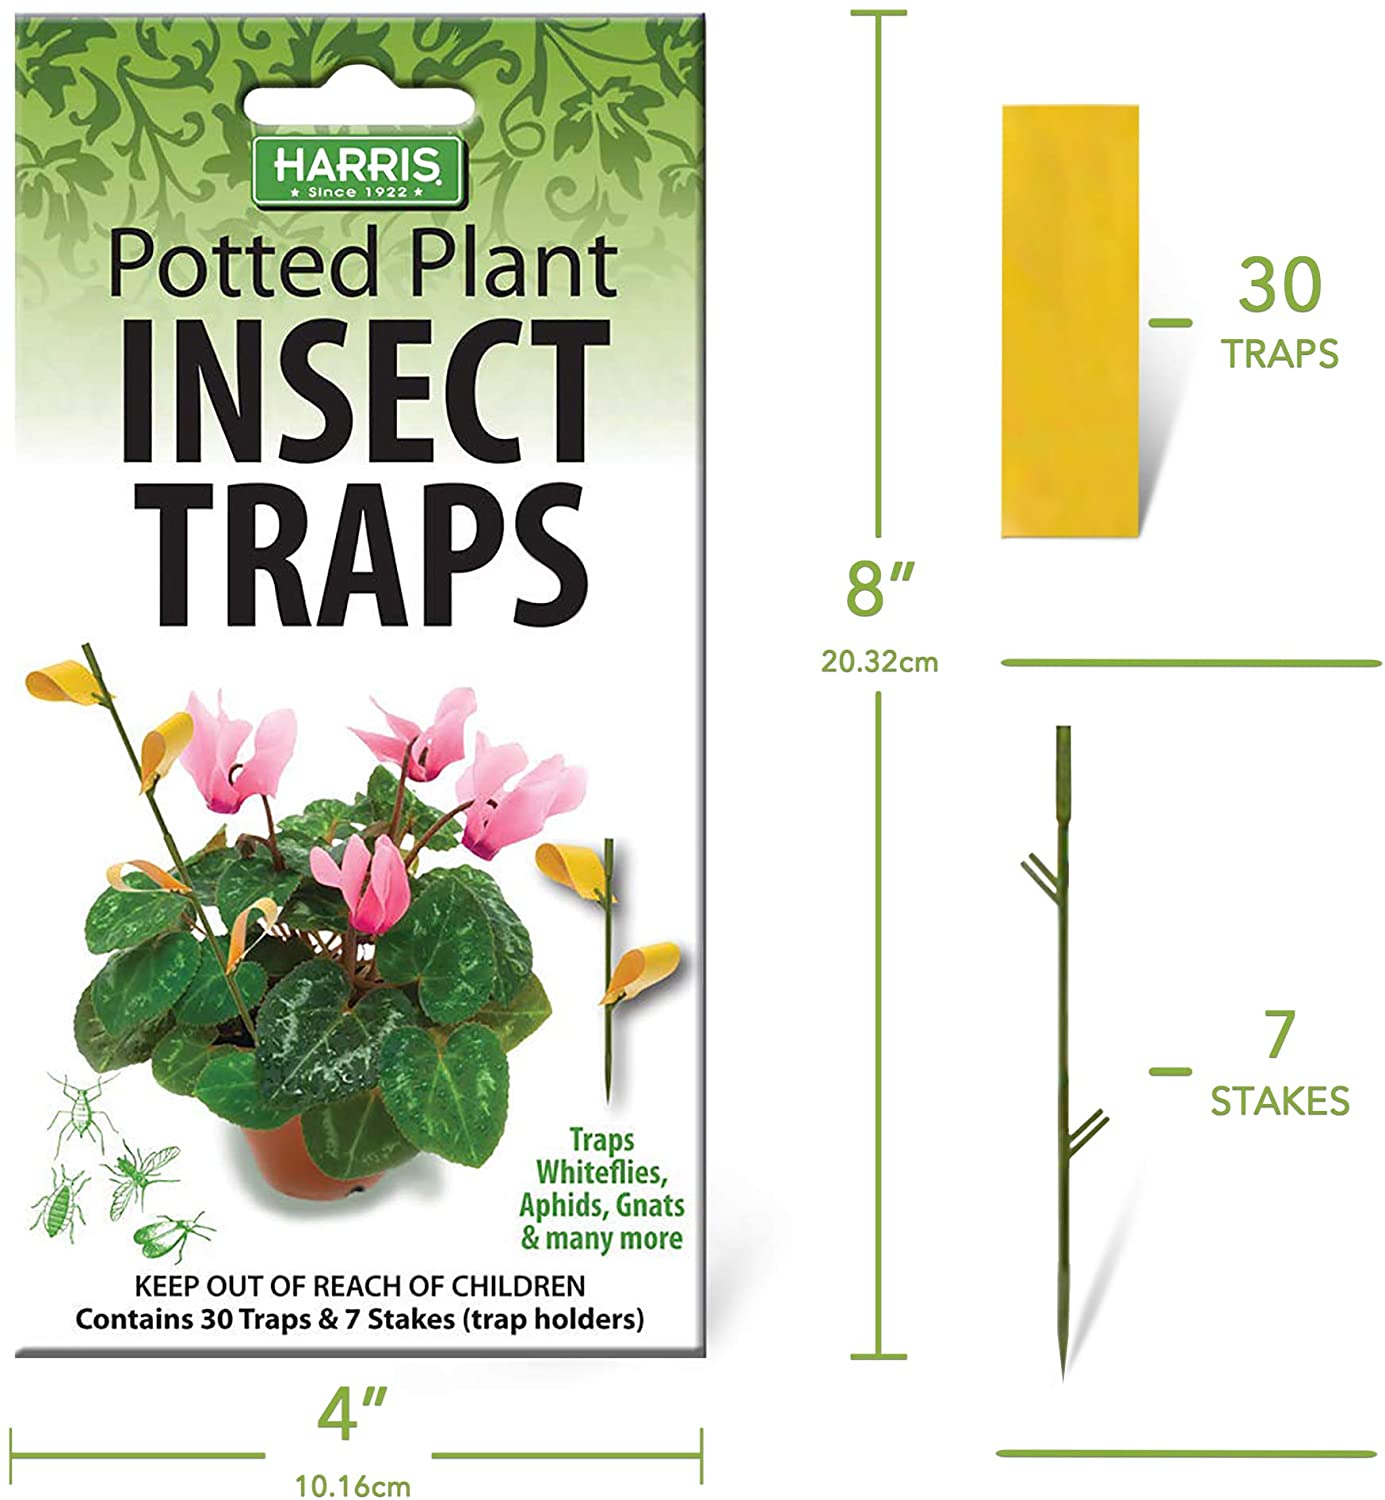 Harris Window Fly Traps, 12 Count